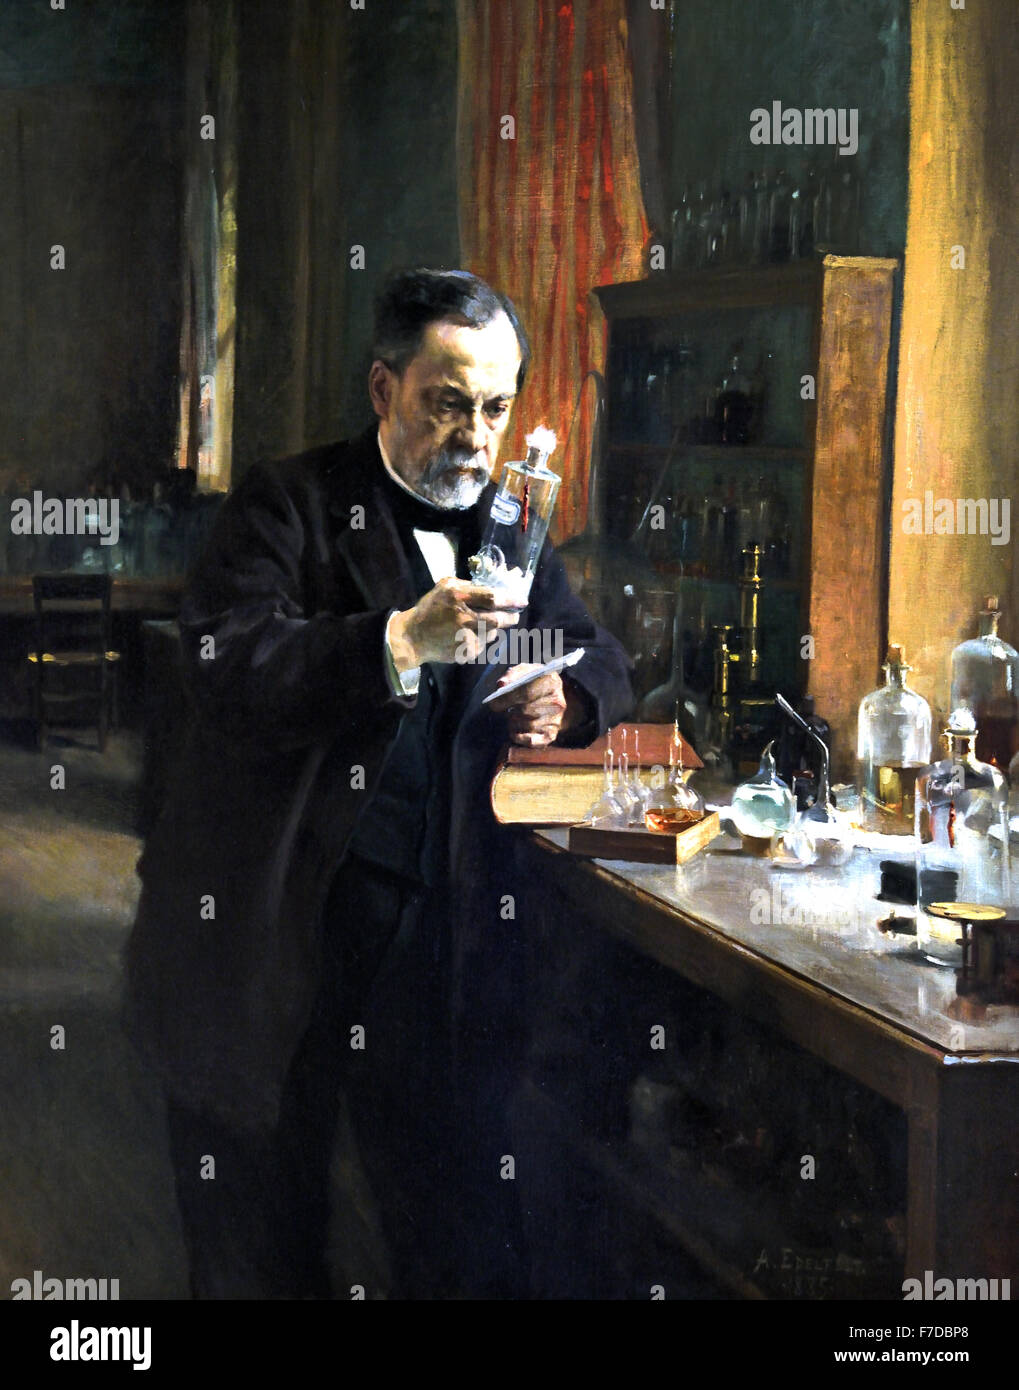 France French Louis Pasteur 1885 Albert Edelfelt  1854 - 1905 Finland  France French  ( Louis Pasteur 1822 – 1895  French chemist and microbiologist renowned for his discoveries of the principles of vaccination, microbial fermentation and pasteurization ) Stock Photo